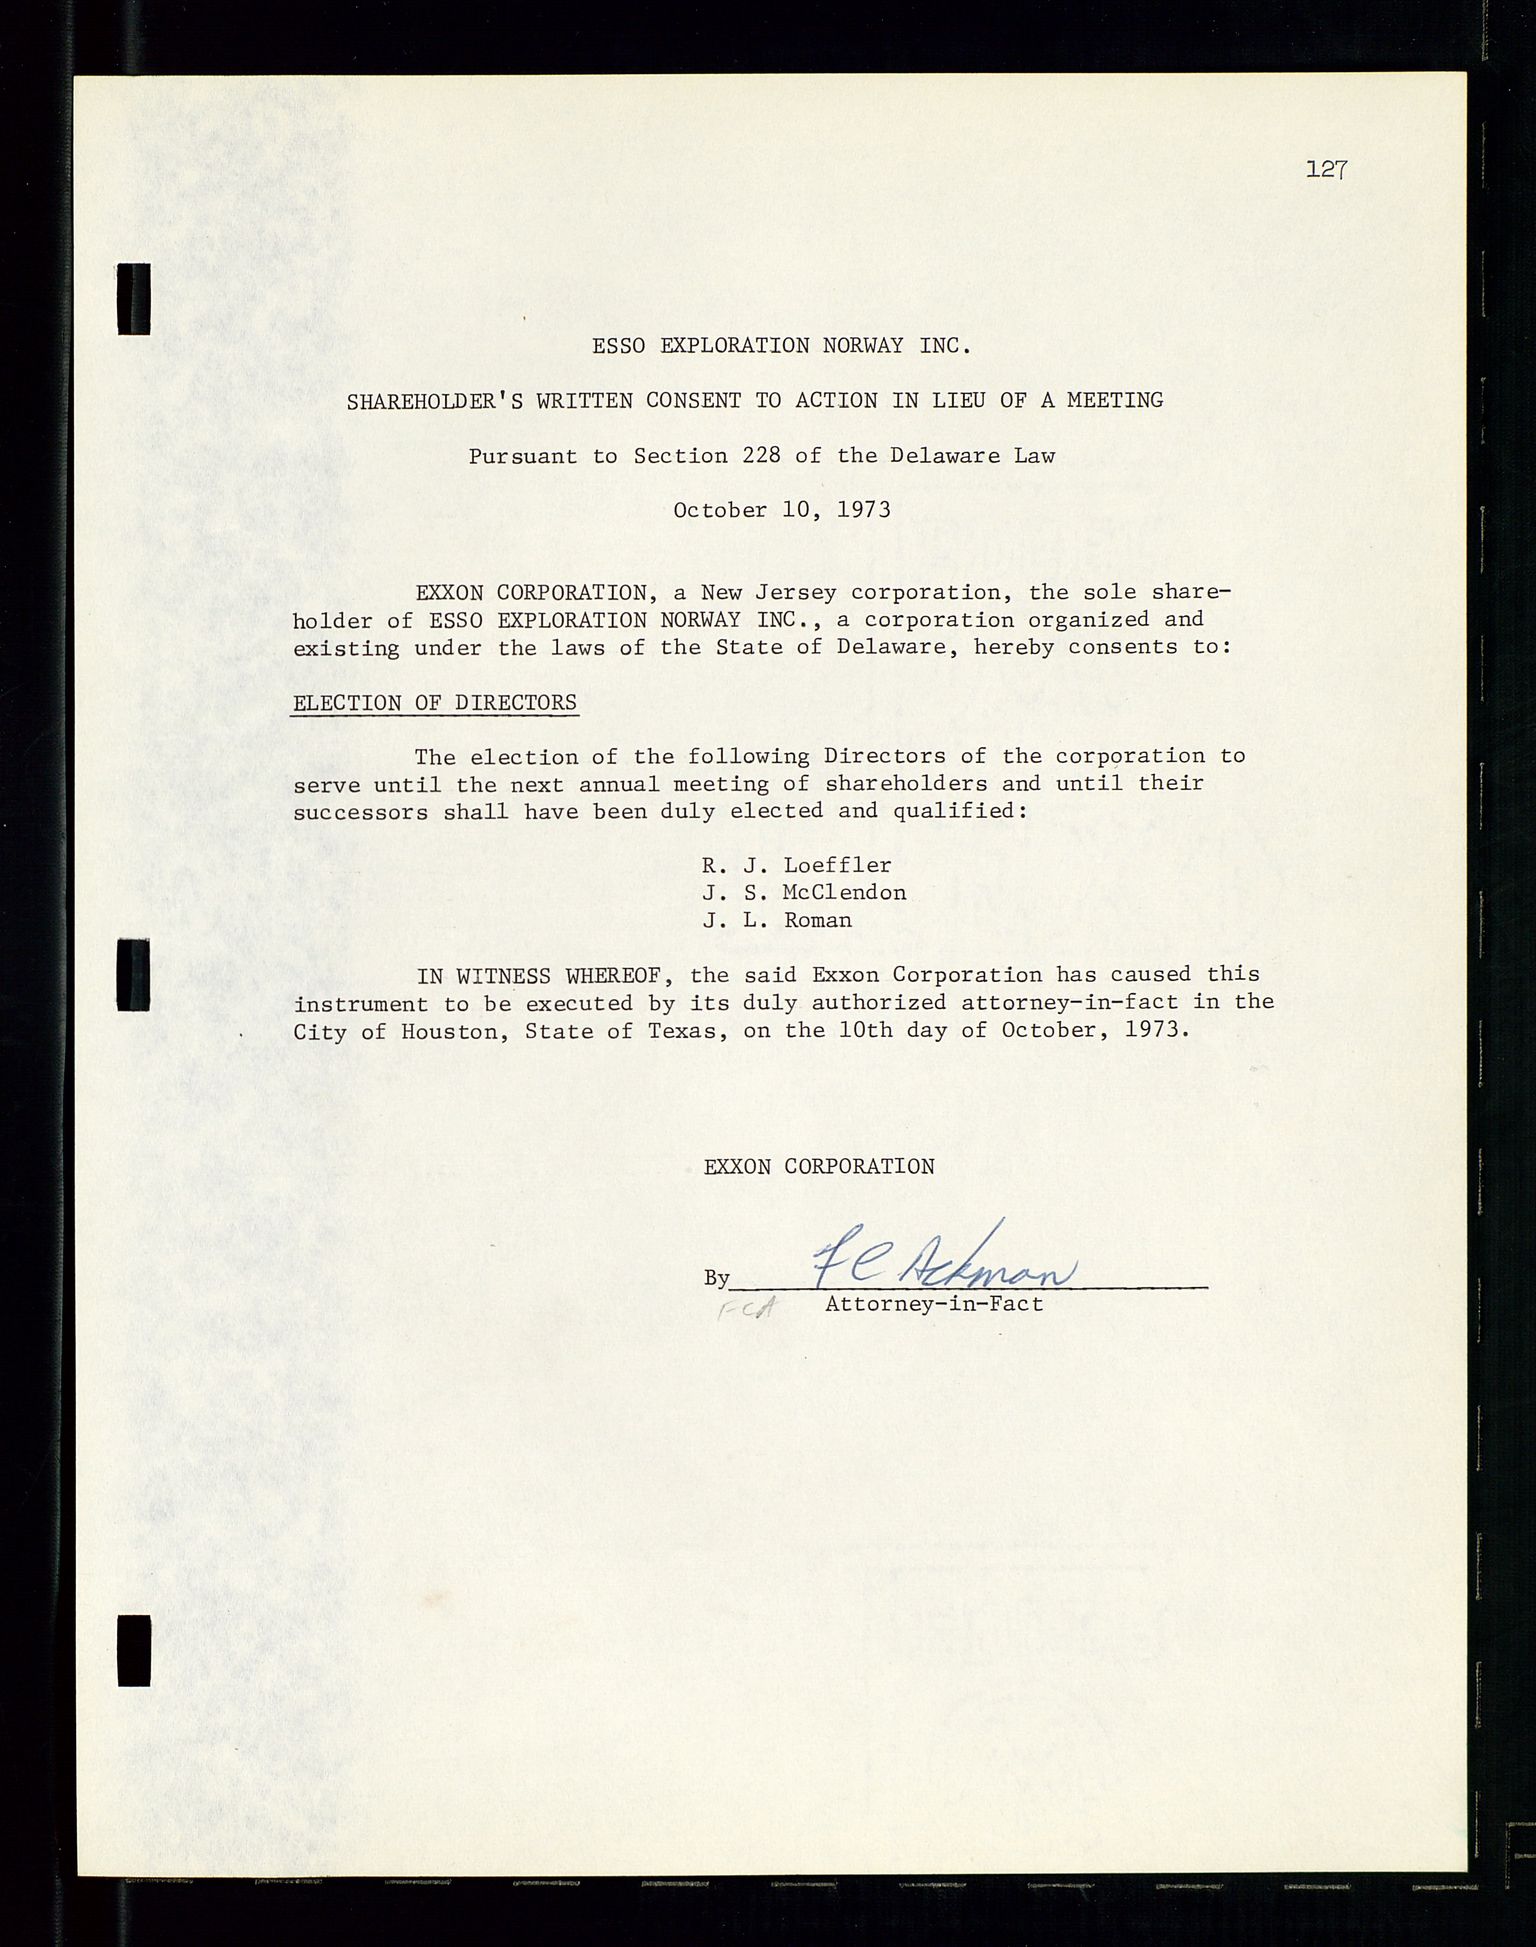 Pa 1512 - Esso Exploration and Production Norway Inc., SAST/A-101917/A/Aa/L0001/0001: Styredokumenter / Corporate records, By-Laws, Board meeting minutes, Incorporations, 1965-1975, p. 127